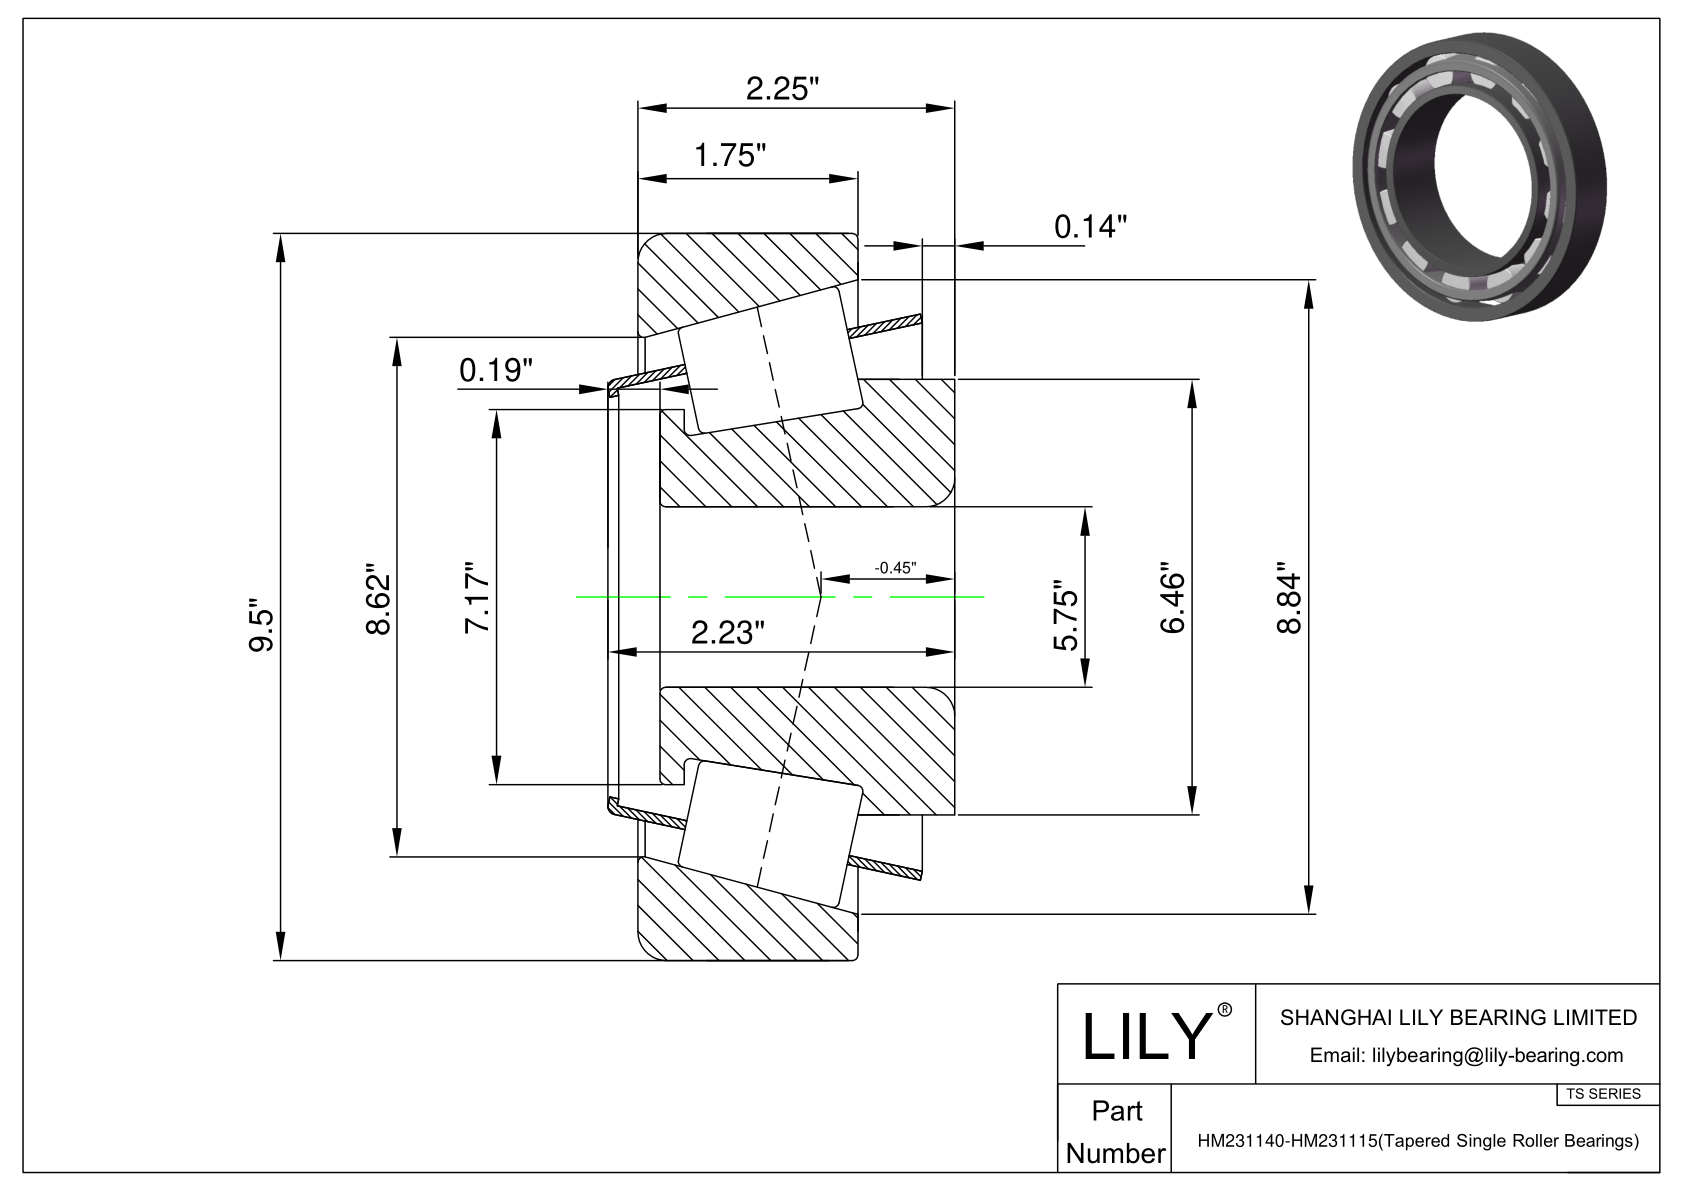 HM231140-HM231115 TS (Tapered Single Roller Bearings) (Imperial) cad drawing